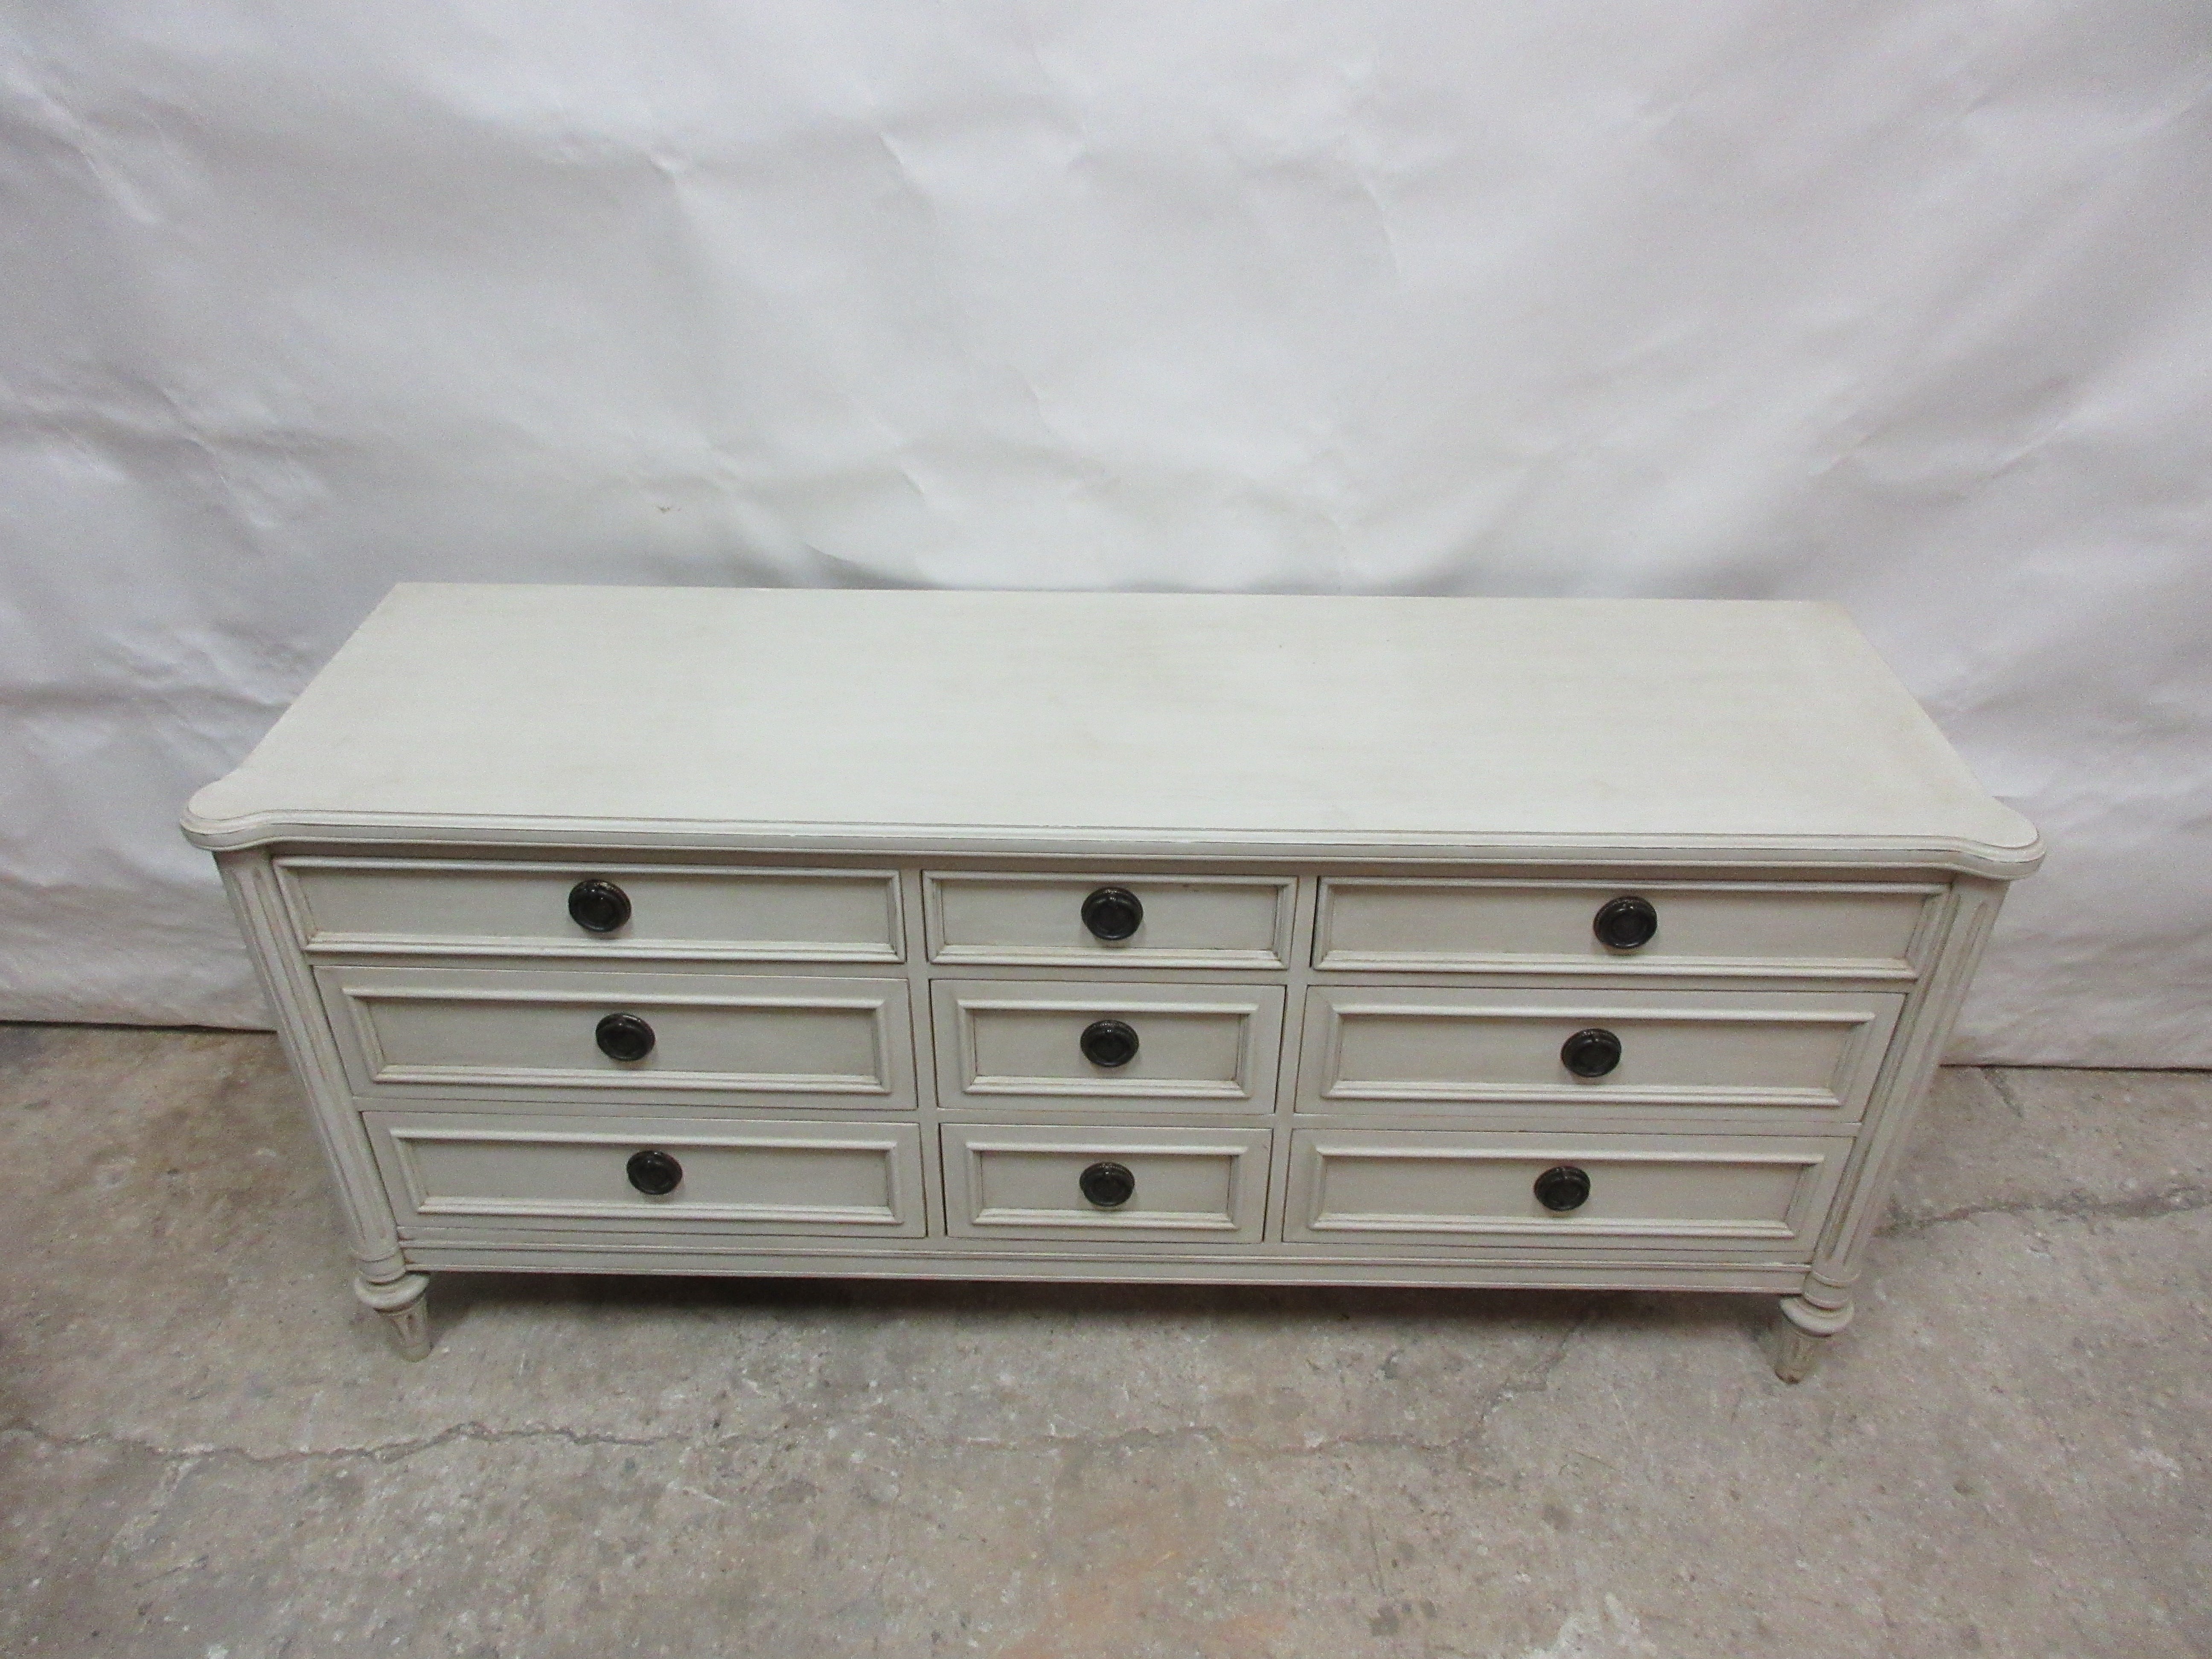 This is an unusual Gustavian style 9 drawer dresser. Its been restored and repainted with milk paints 